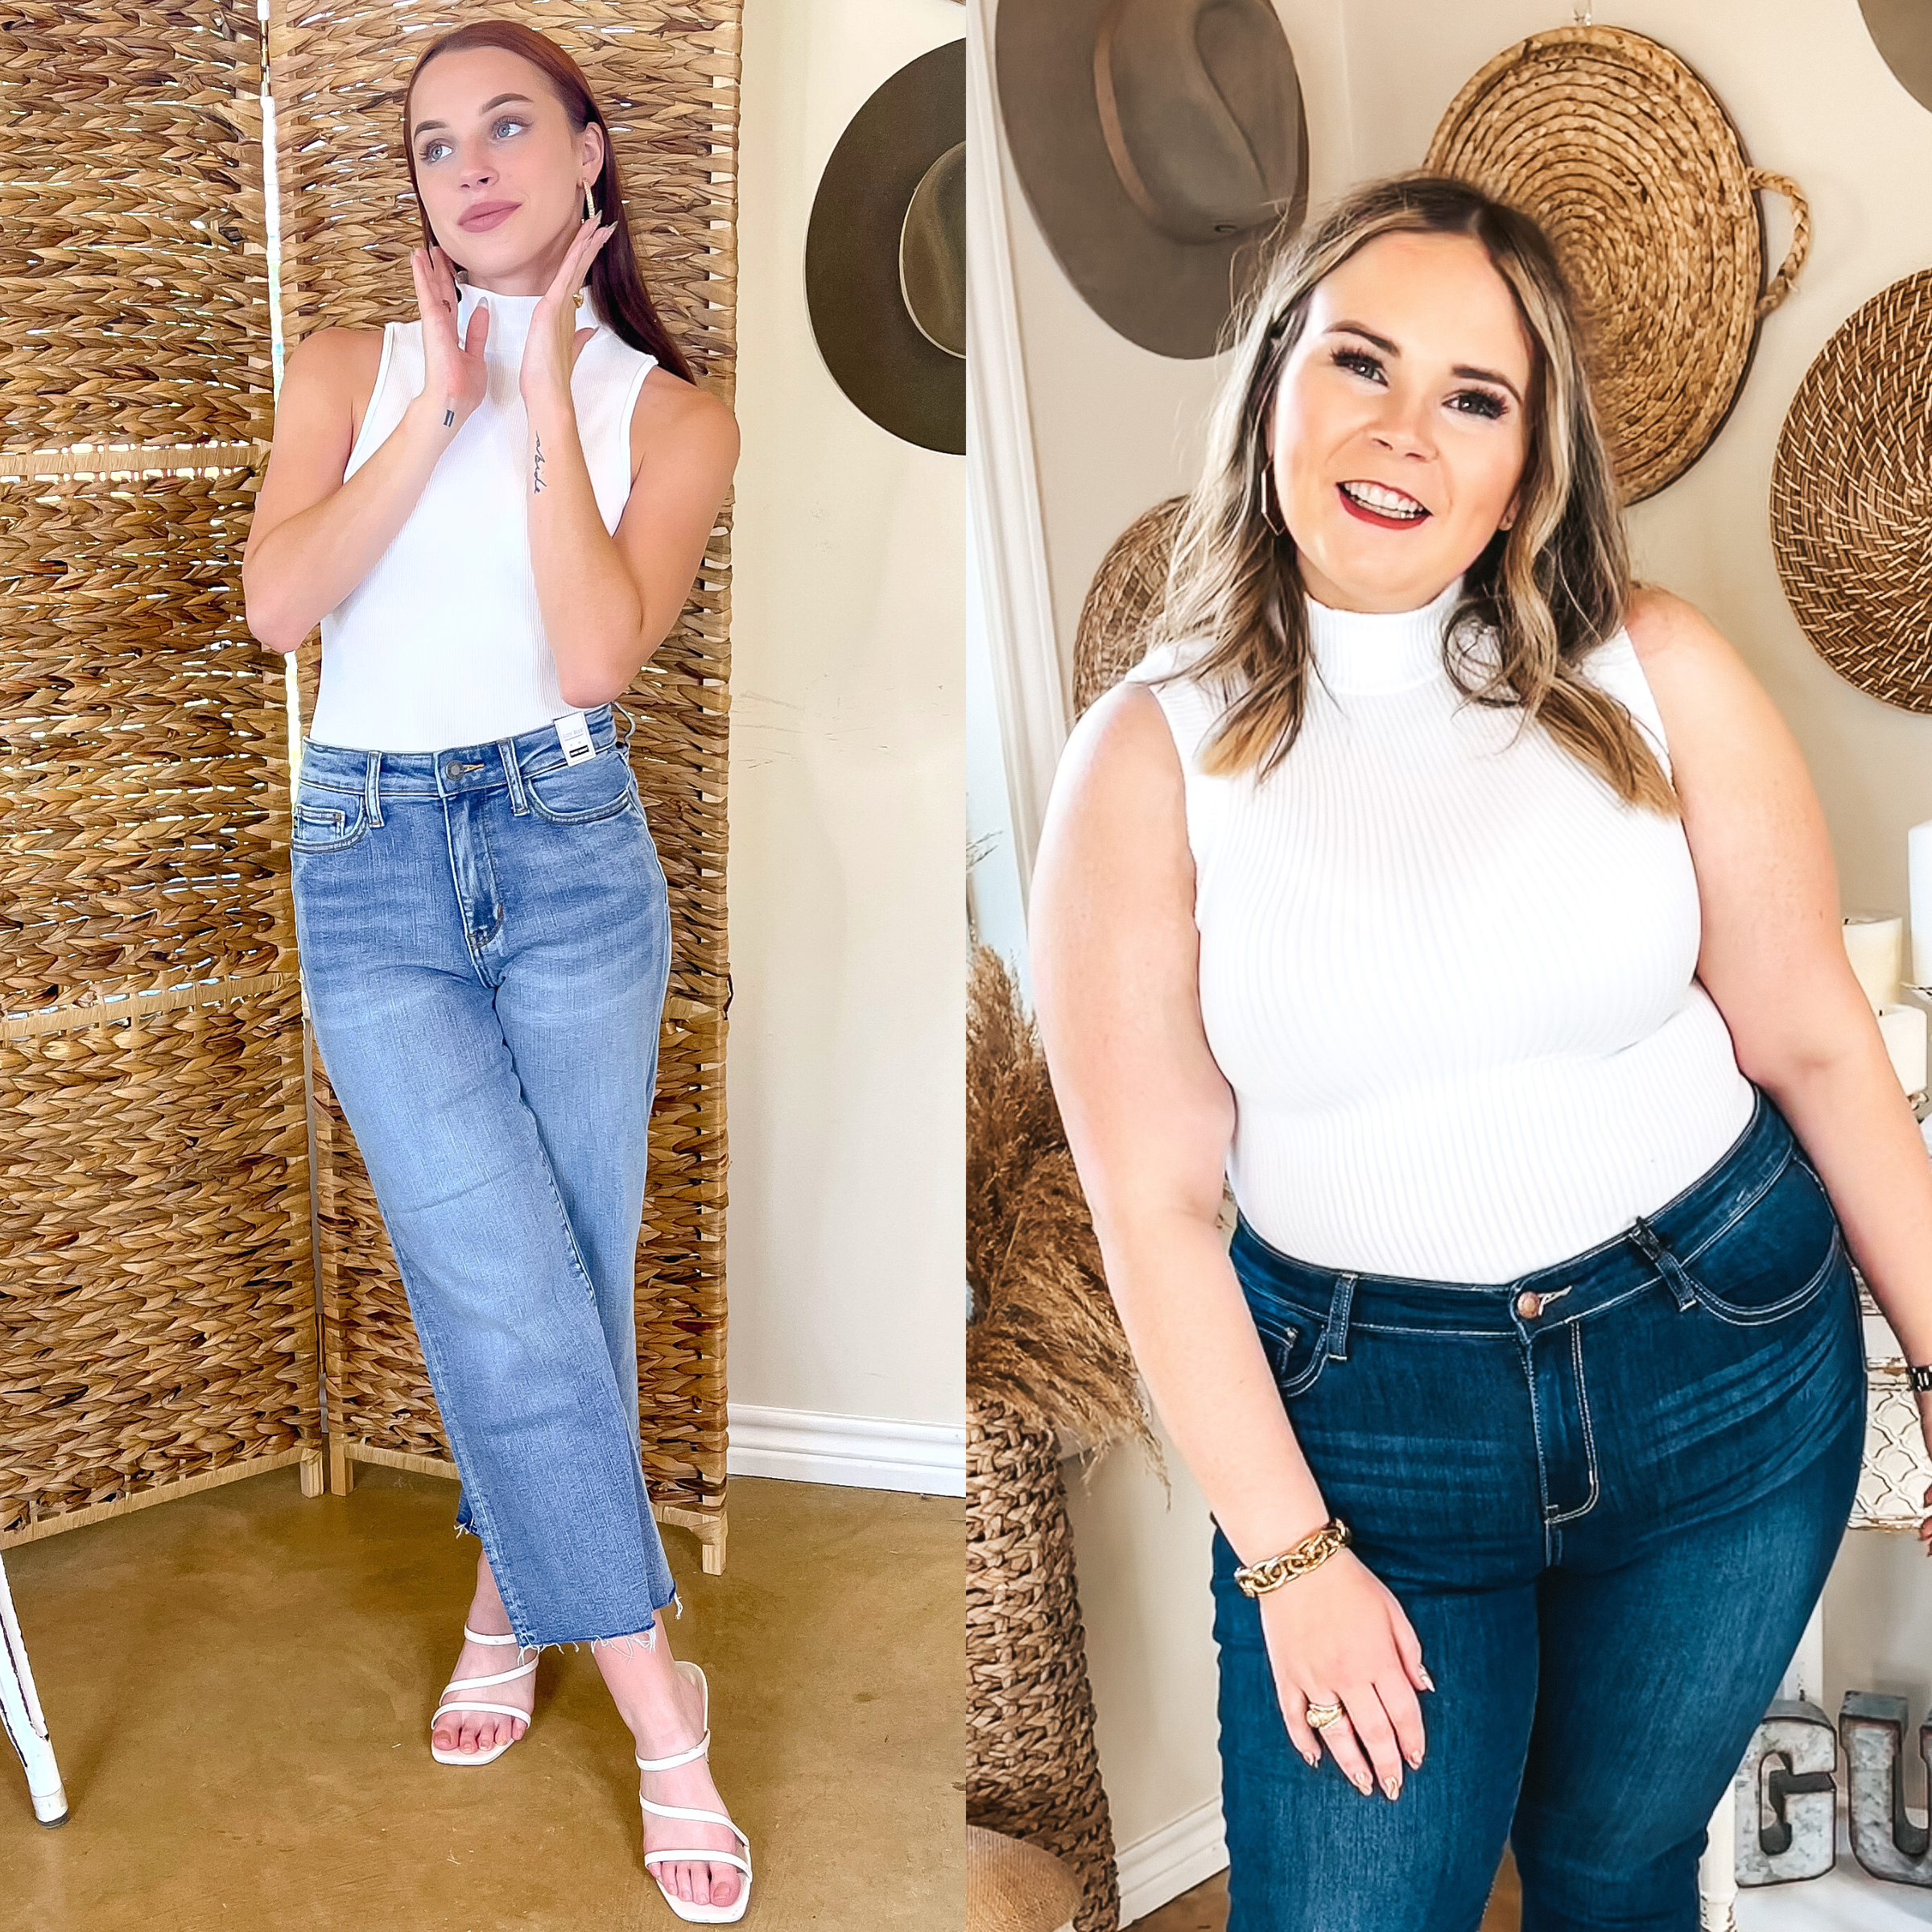 Both models are wearing a white, ribbed, turtleneck, tank top bodysuit. Model on the left is wearing raw hem light wash jeans with white strappy heels. Model on the right is wearing dark wash jeans and gold bracelet, rings, and earrings